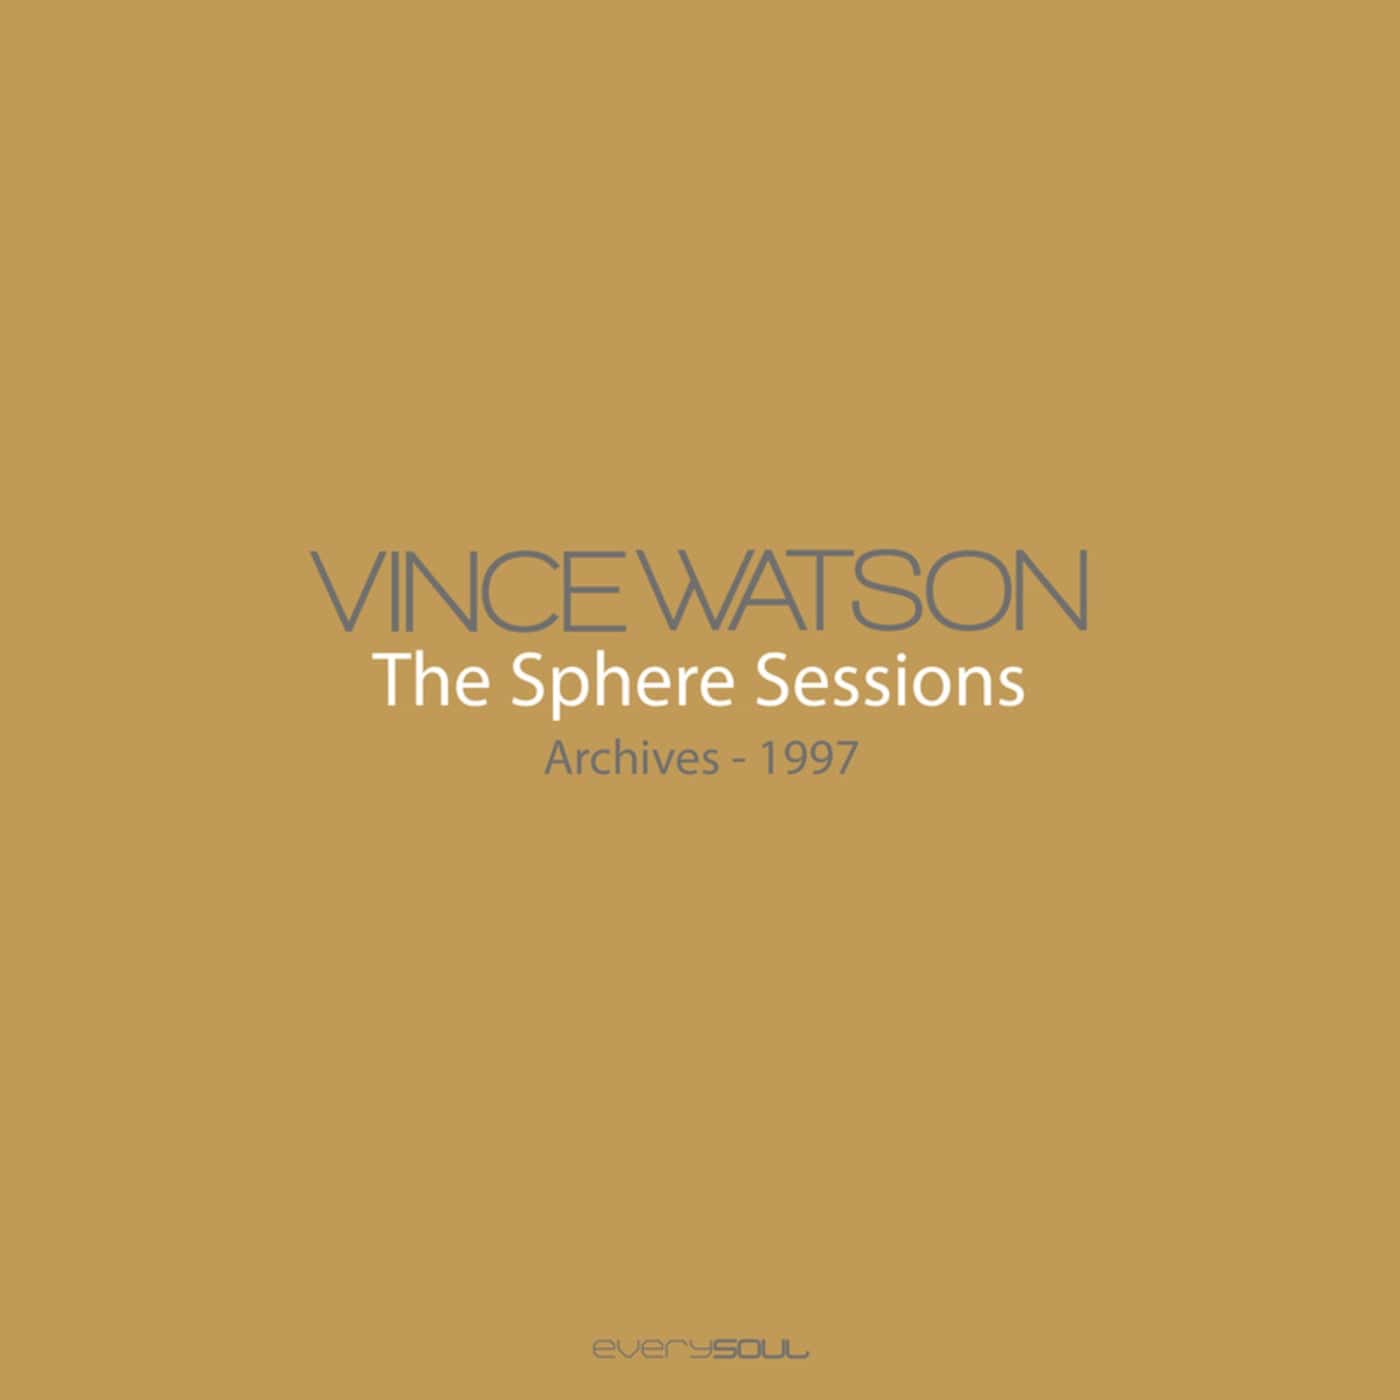 Download Vince Watson - Archives - The Sphere Sessions on Electrobuzz